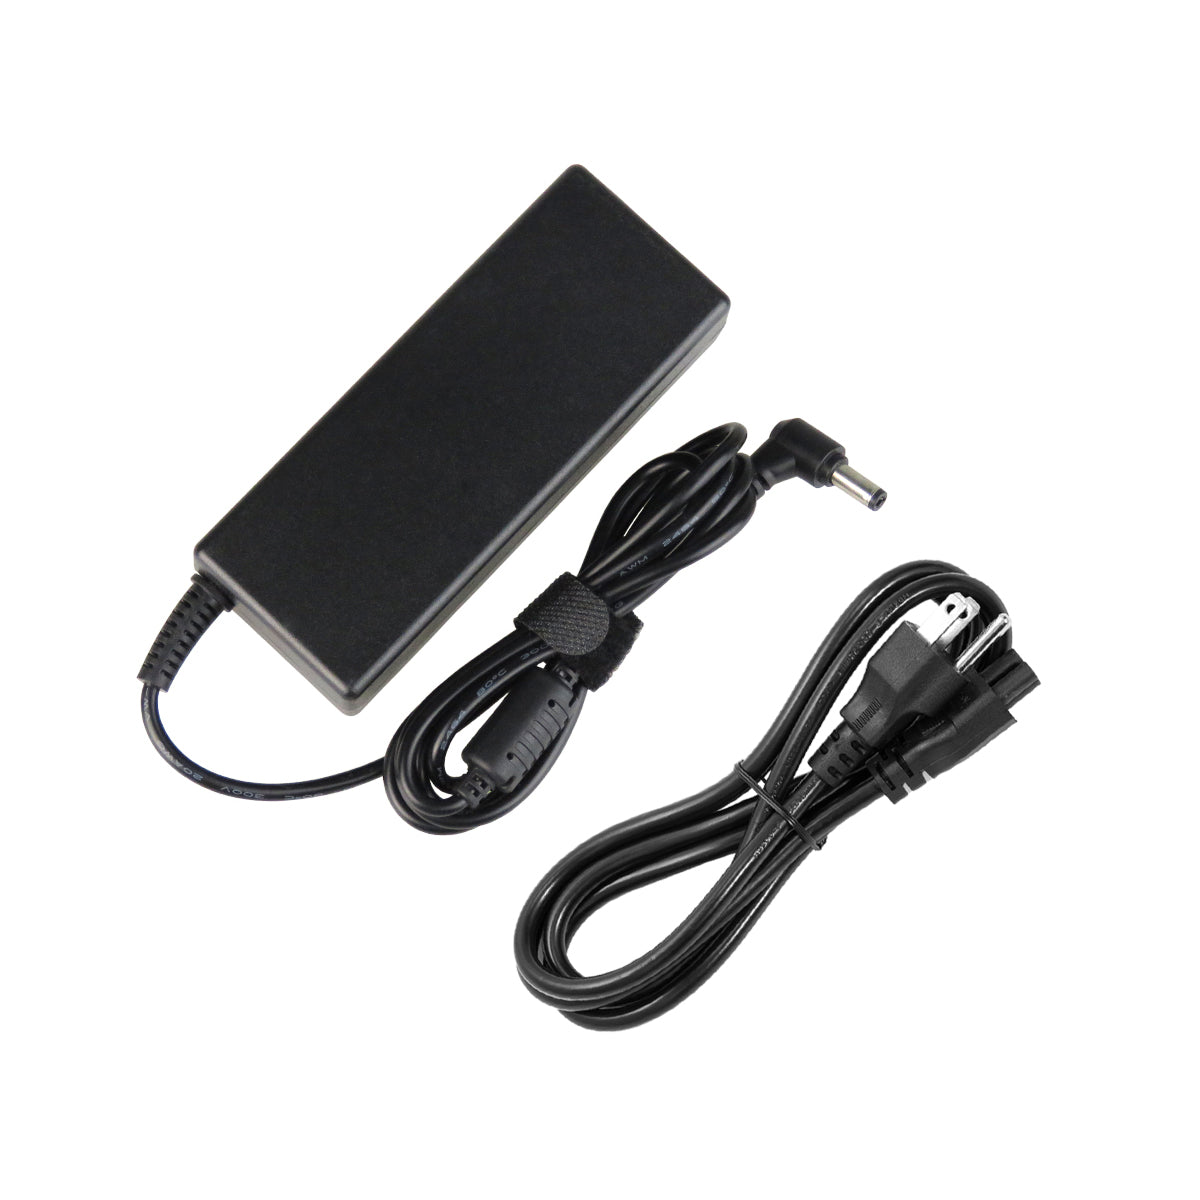 AC Adapter Charger for ASUS K73SV Notebook.